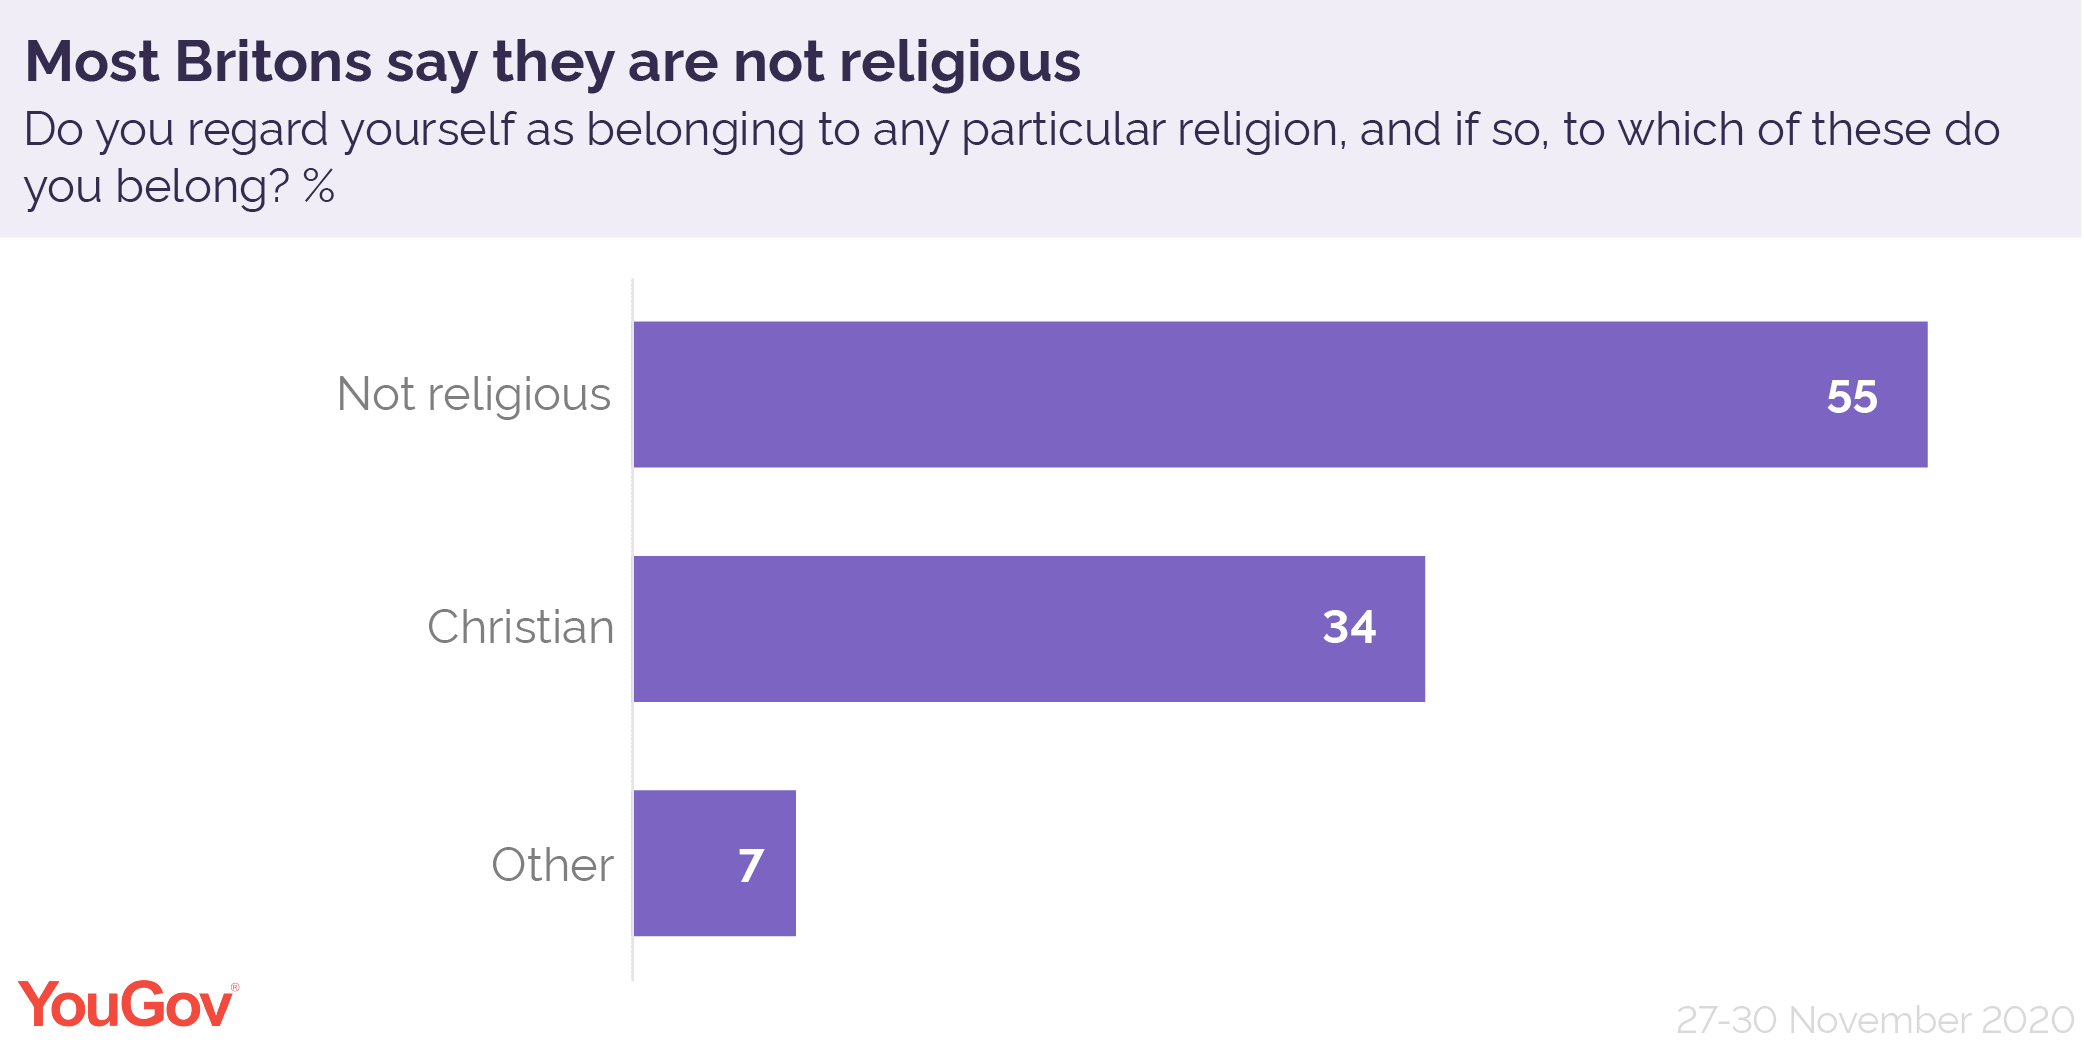 How religious are British people? YouGov